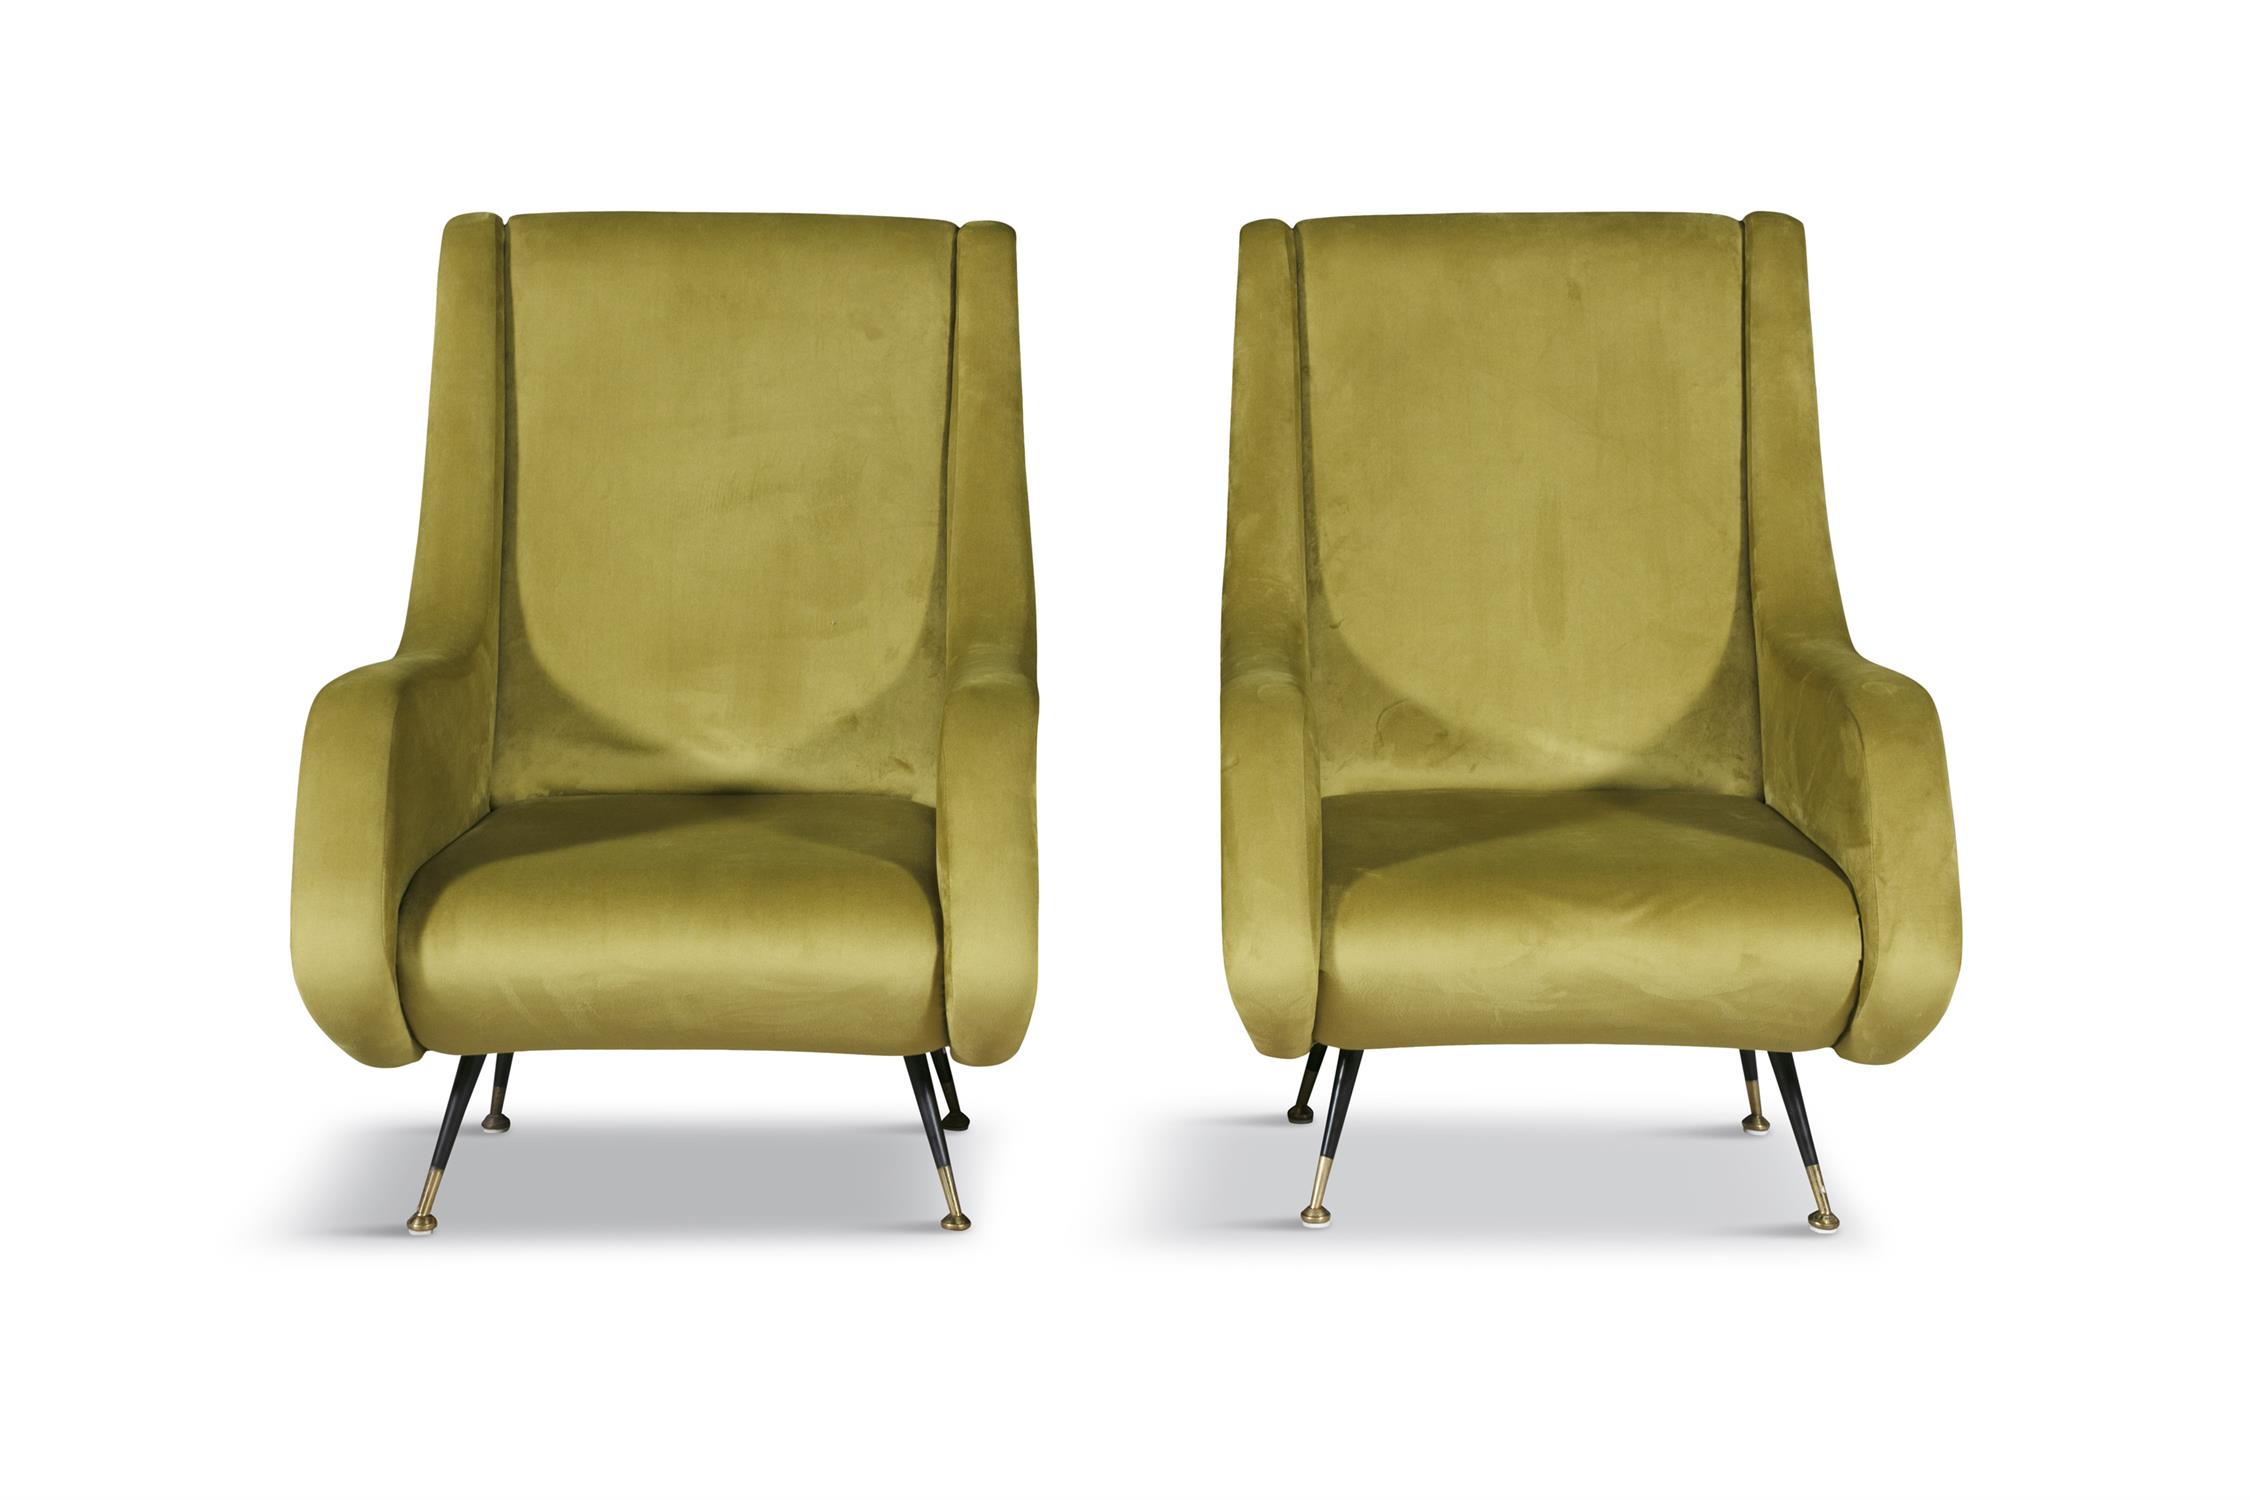 ARMCHAIRS A pair olive upholstered Italian armchairs. 67 x 90 x 97cm(h); seat 40cm(h) - Image 2 of 5